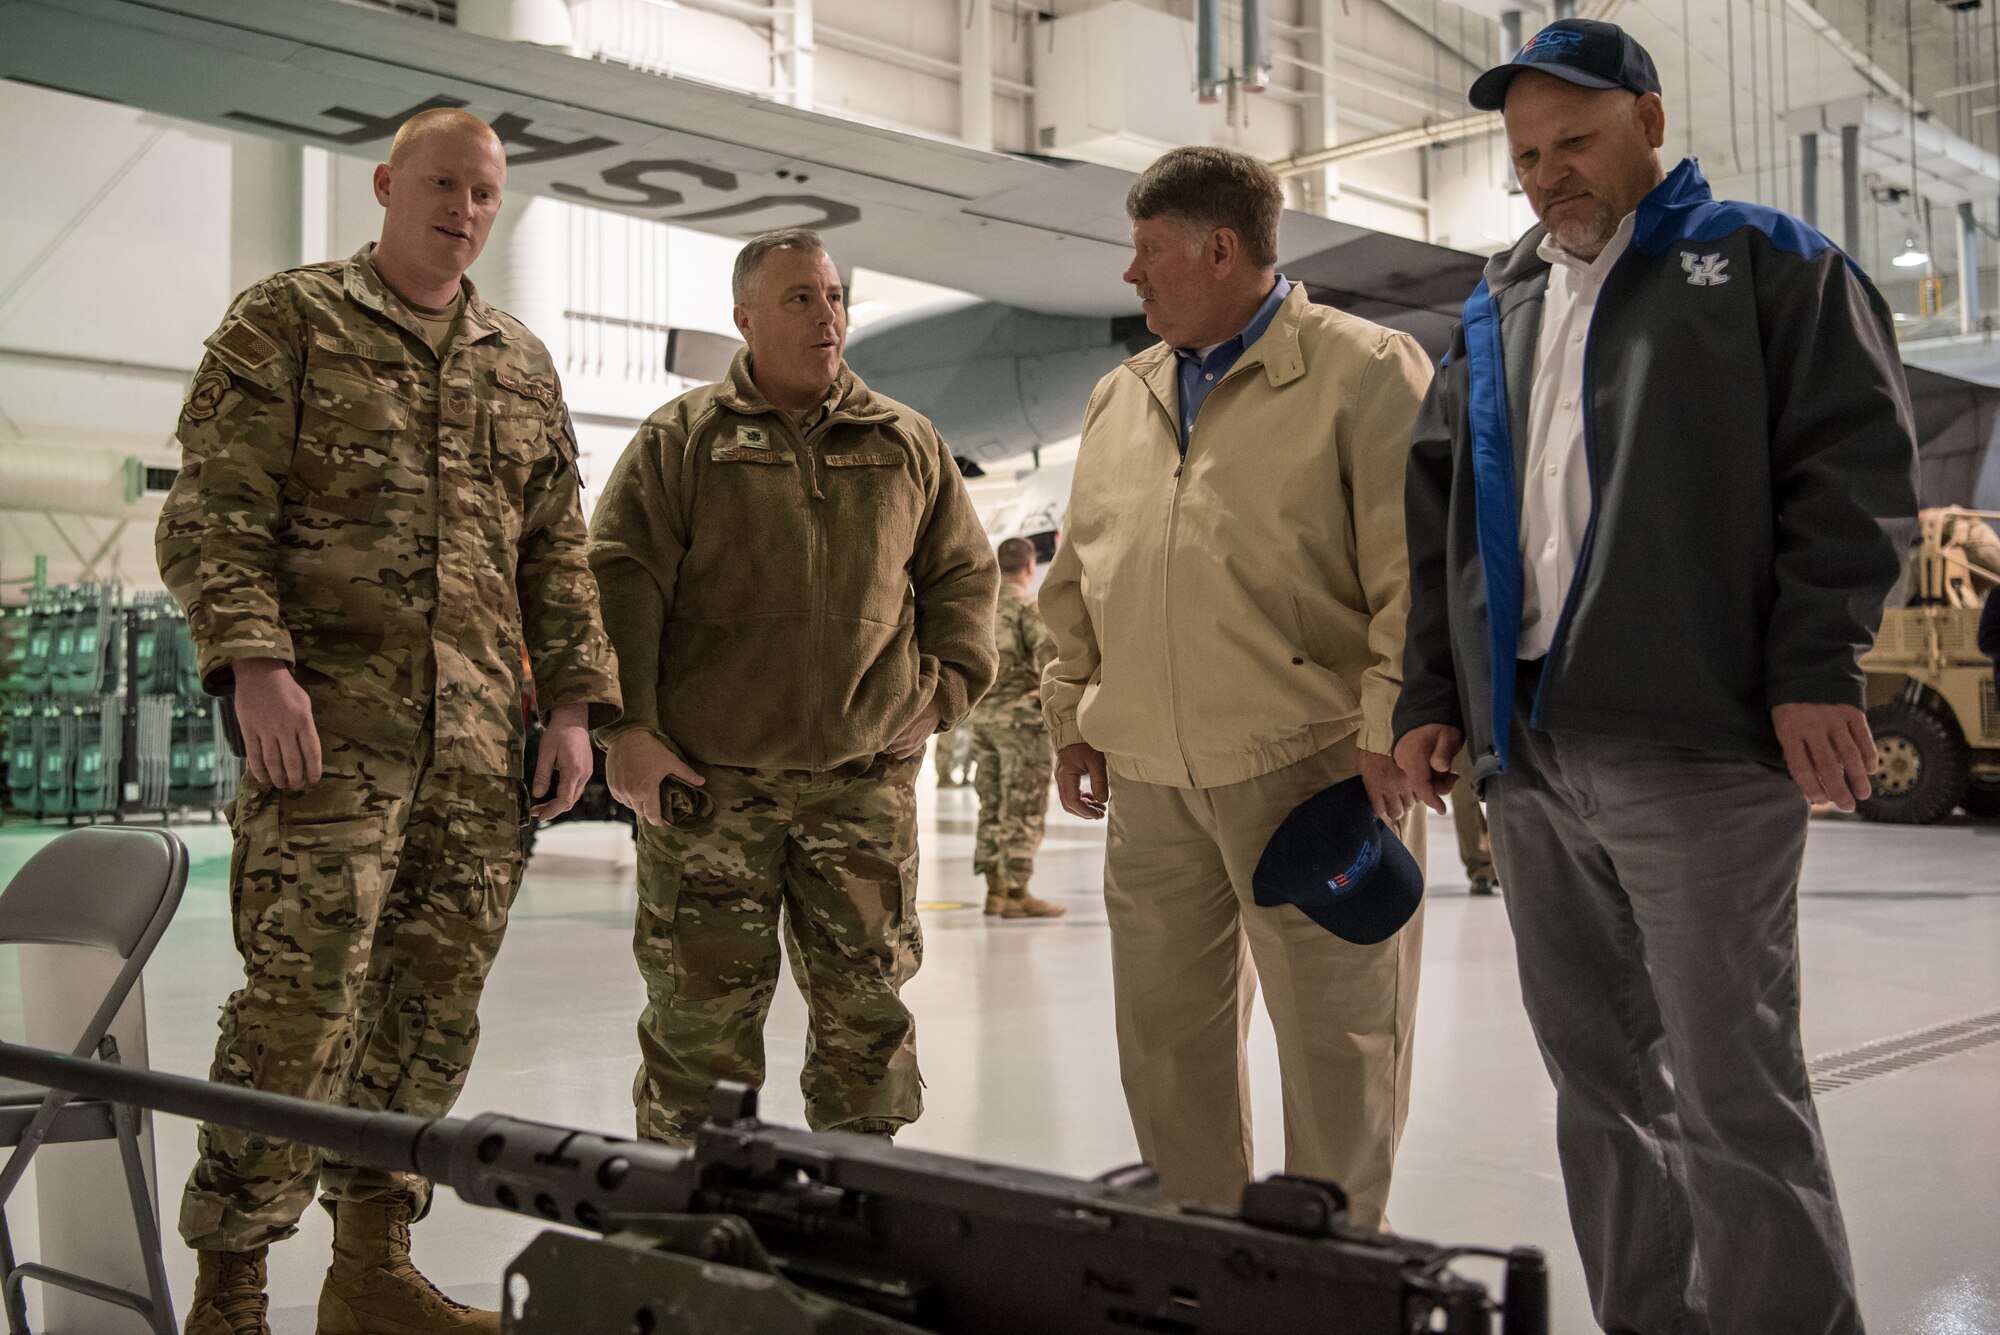 More than two-dozen civilian employers learn about the different functional areas of the 123rd Airlift Wing during a tour of the Kentucky Air National Guard Base in Louisville, Ky., March 15, 2019. The employers were participating in an ESGR “Bosslift,” which enhances awareness and understanding between National Guardsmen and the civilian employers for whom they work when they’re not on duty. (U.S. Air National Guard photo by Staff Sgt. Joshua Horton)